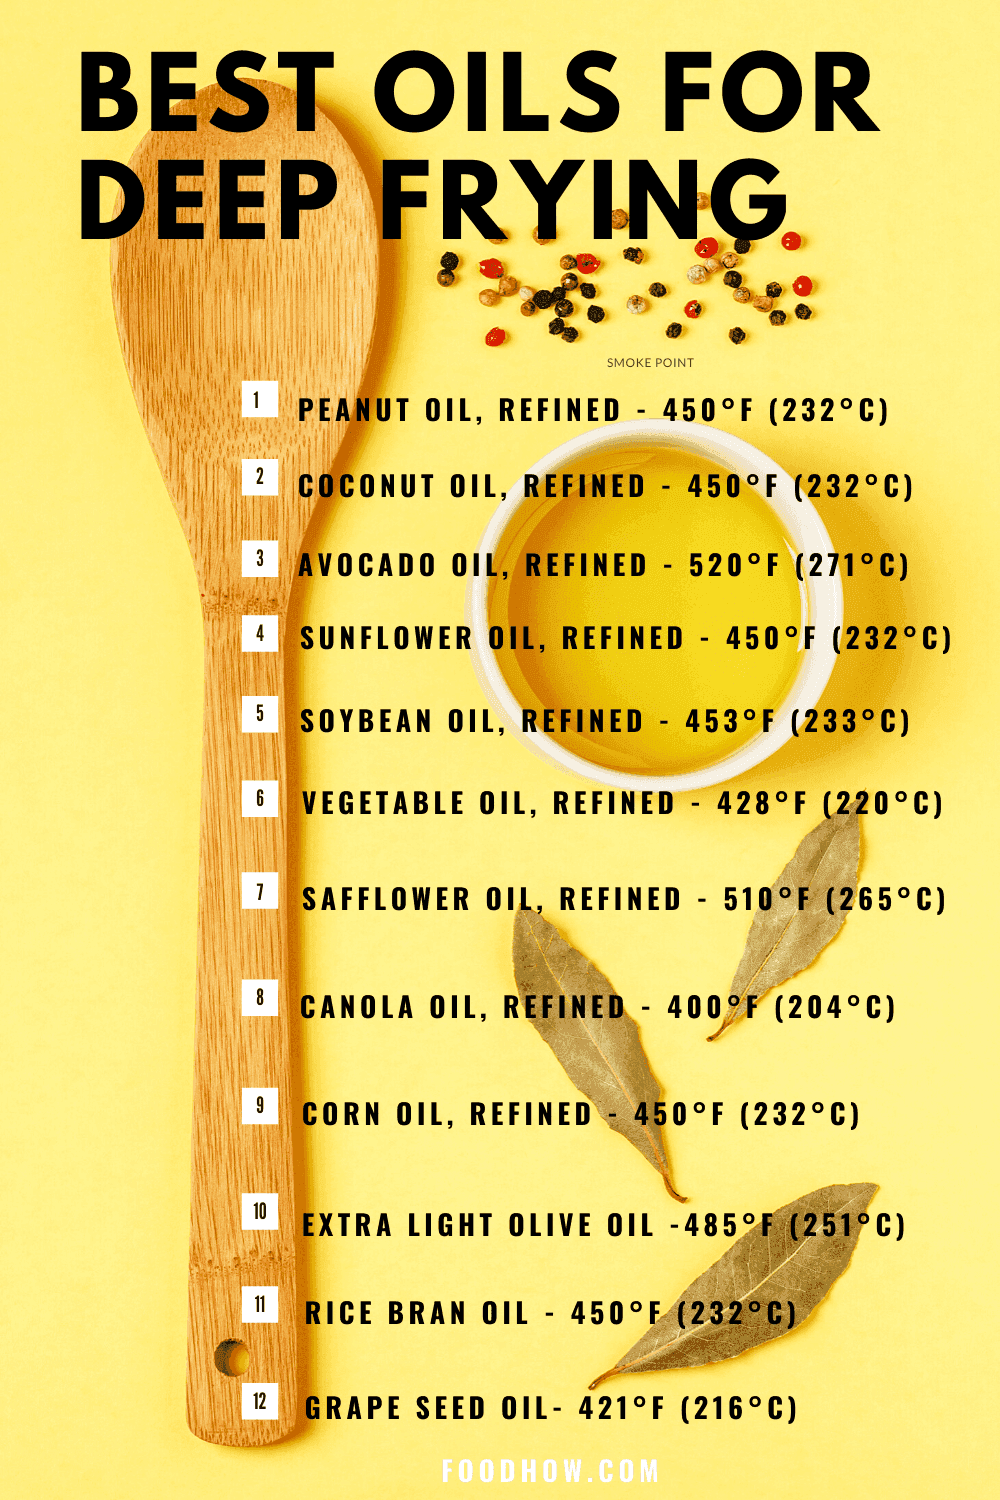 list of oils that are best suited for deep frying